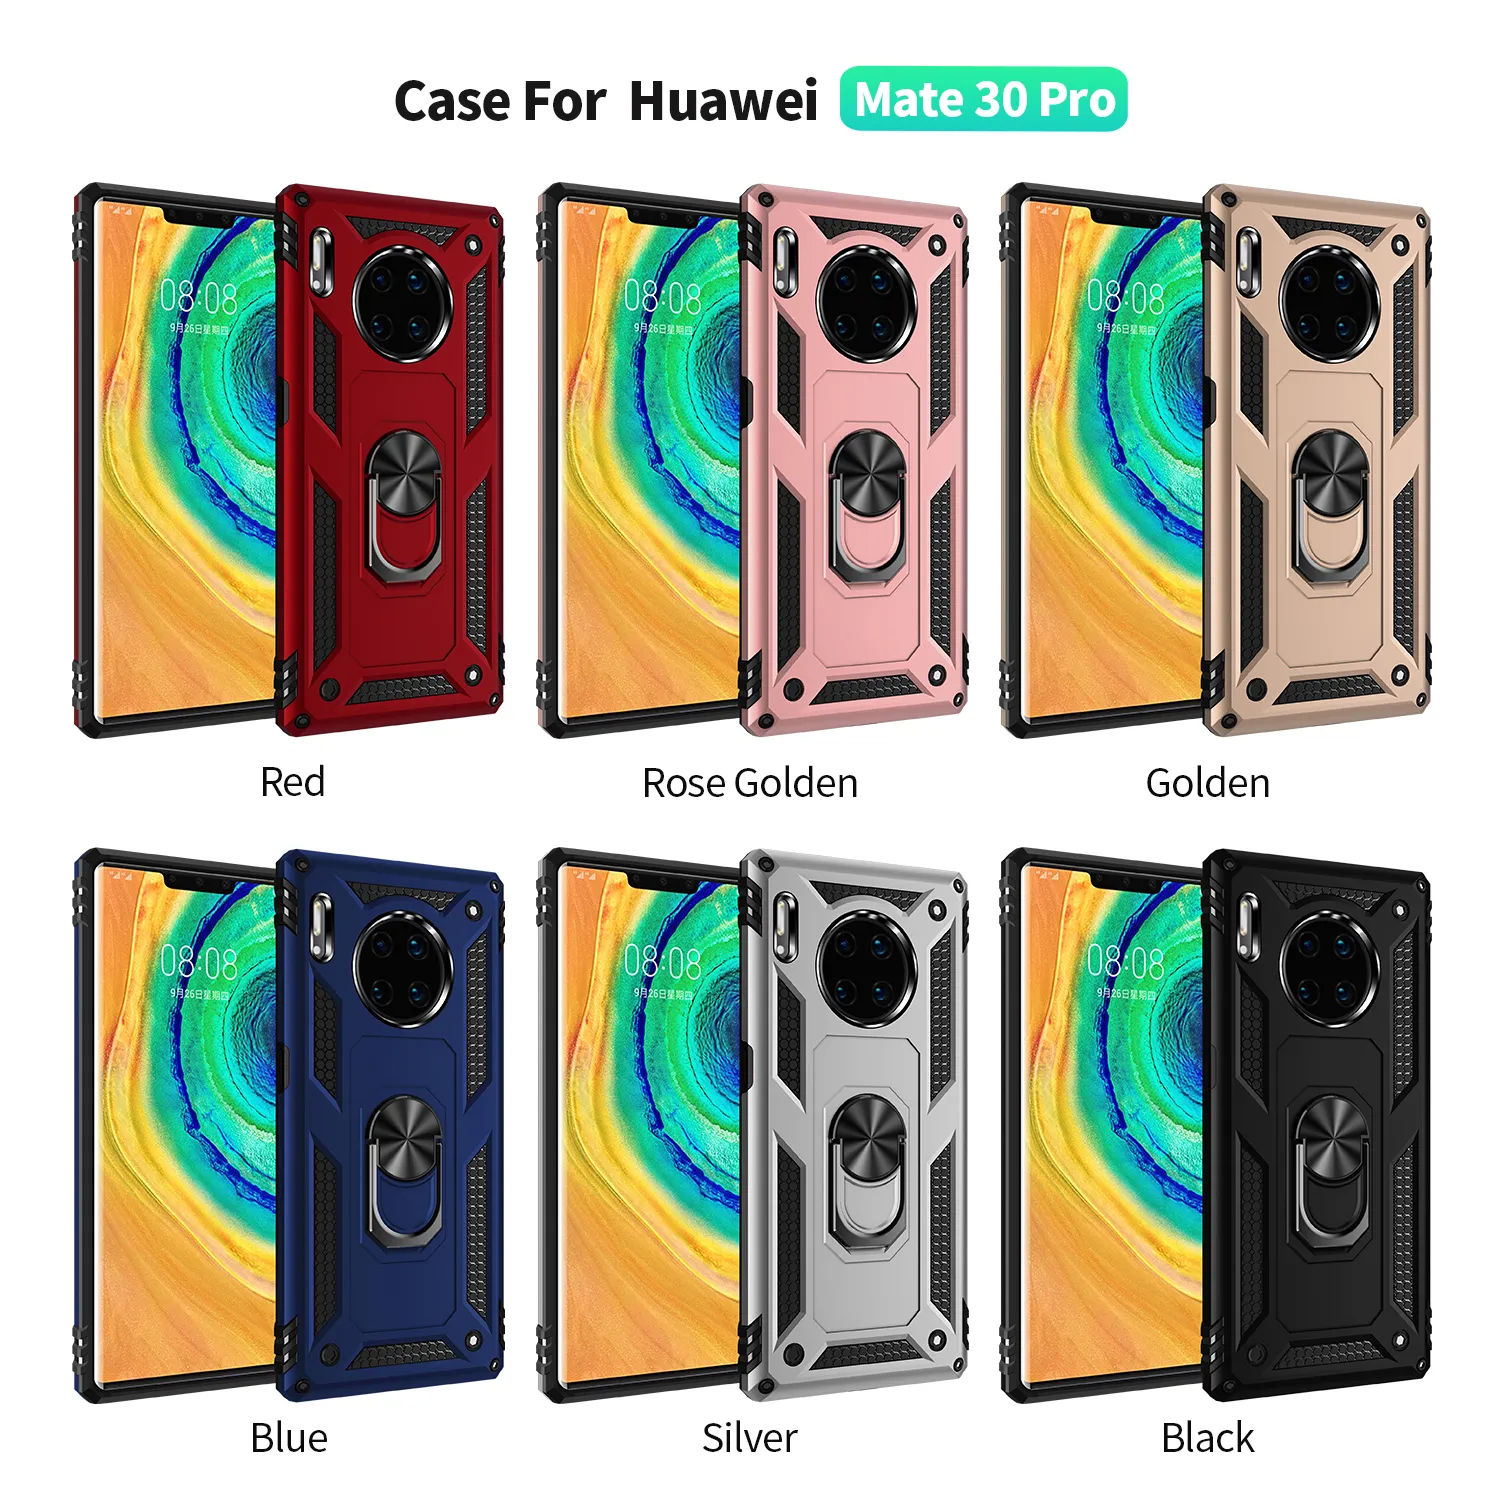 Military Blade Metal Kickstand Hülle für Huawei Mate 30 Pro Mate 30 P30 Pro P20 Lite Mate20 Lite Drop Tested Protective Cover